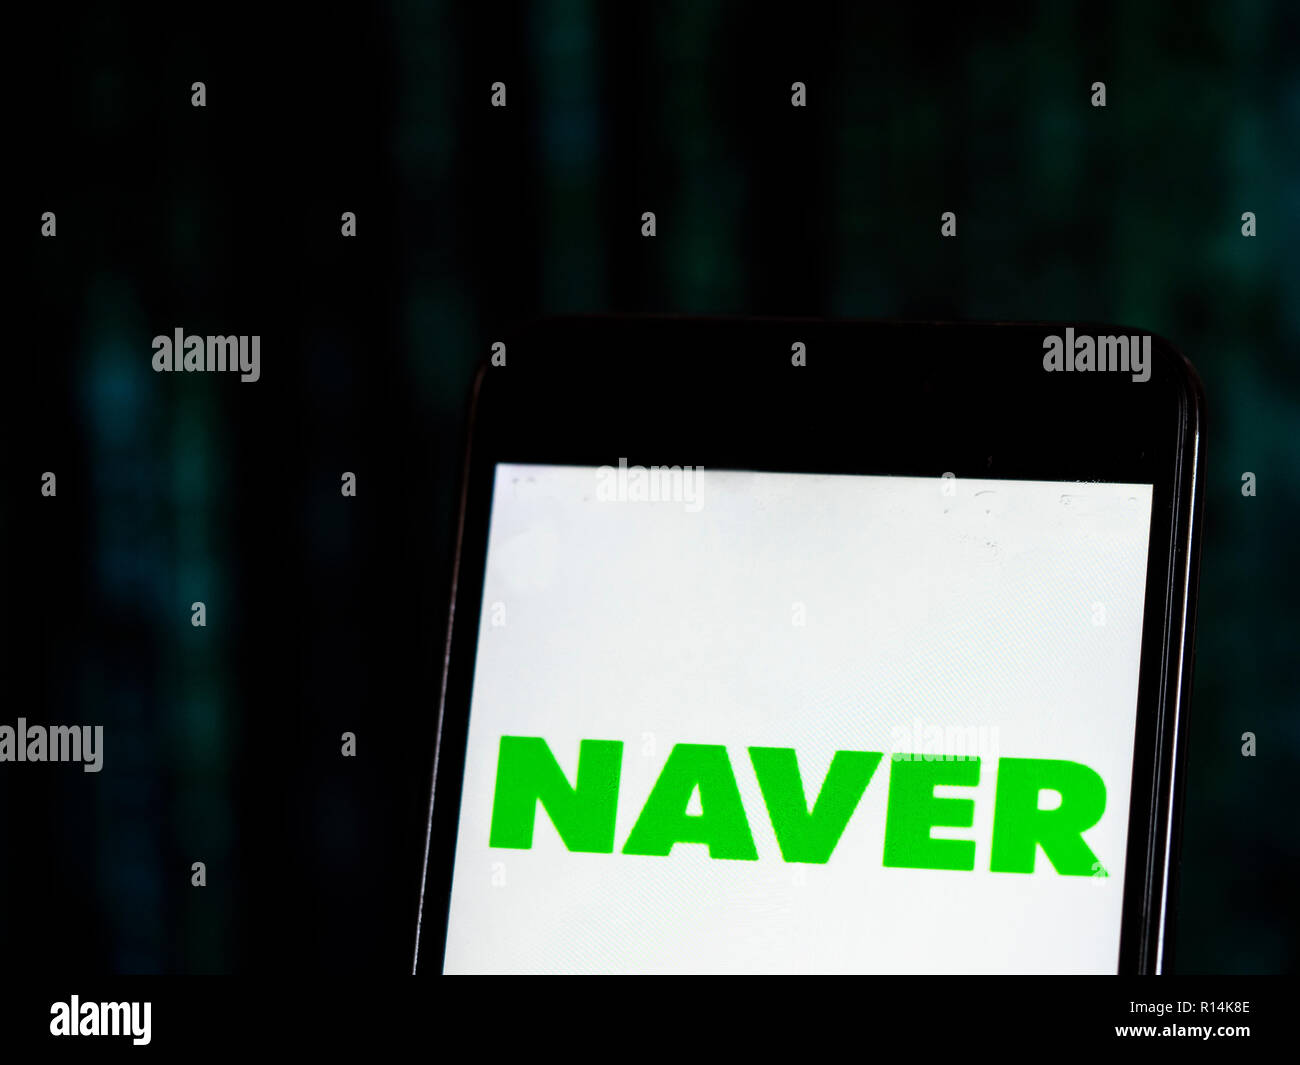 Naver Internet company logo seen displayed on smart phone. Naver Corporation is an Internet content service company headquartered in Seongnam, South Korea that operates the Korean search engine Naver. Naver established itself as an early pioneer in the use of user-generated content through the creation of the online Q&A platform Knowledge iN. Stock Photo